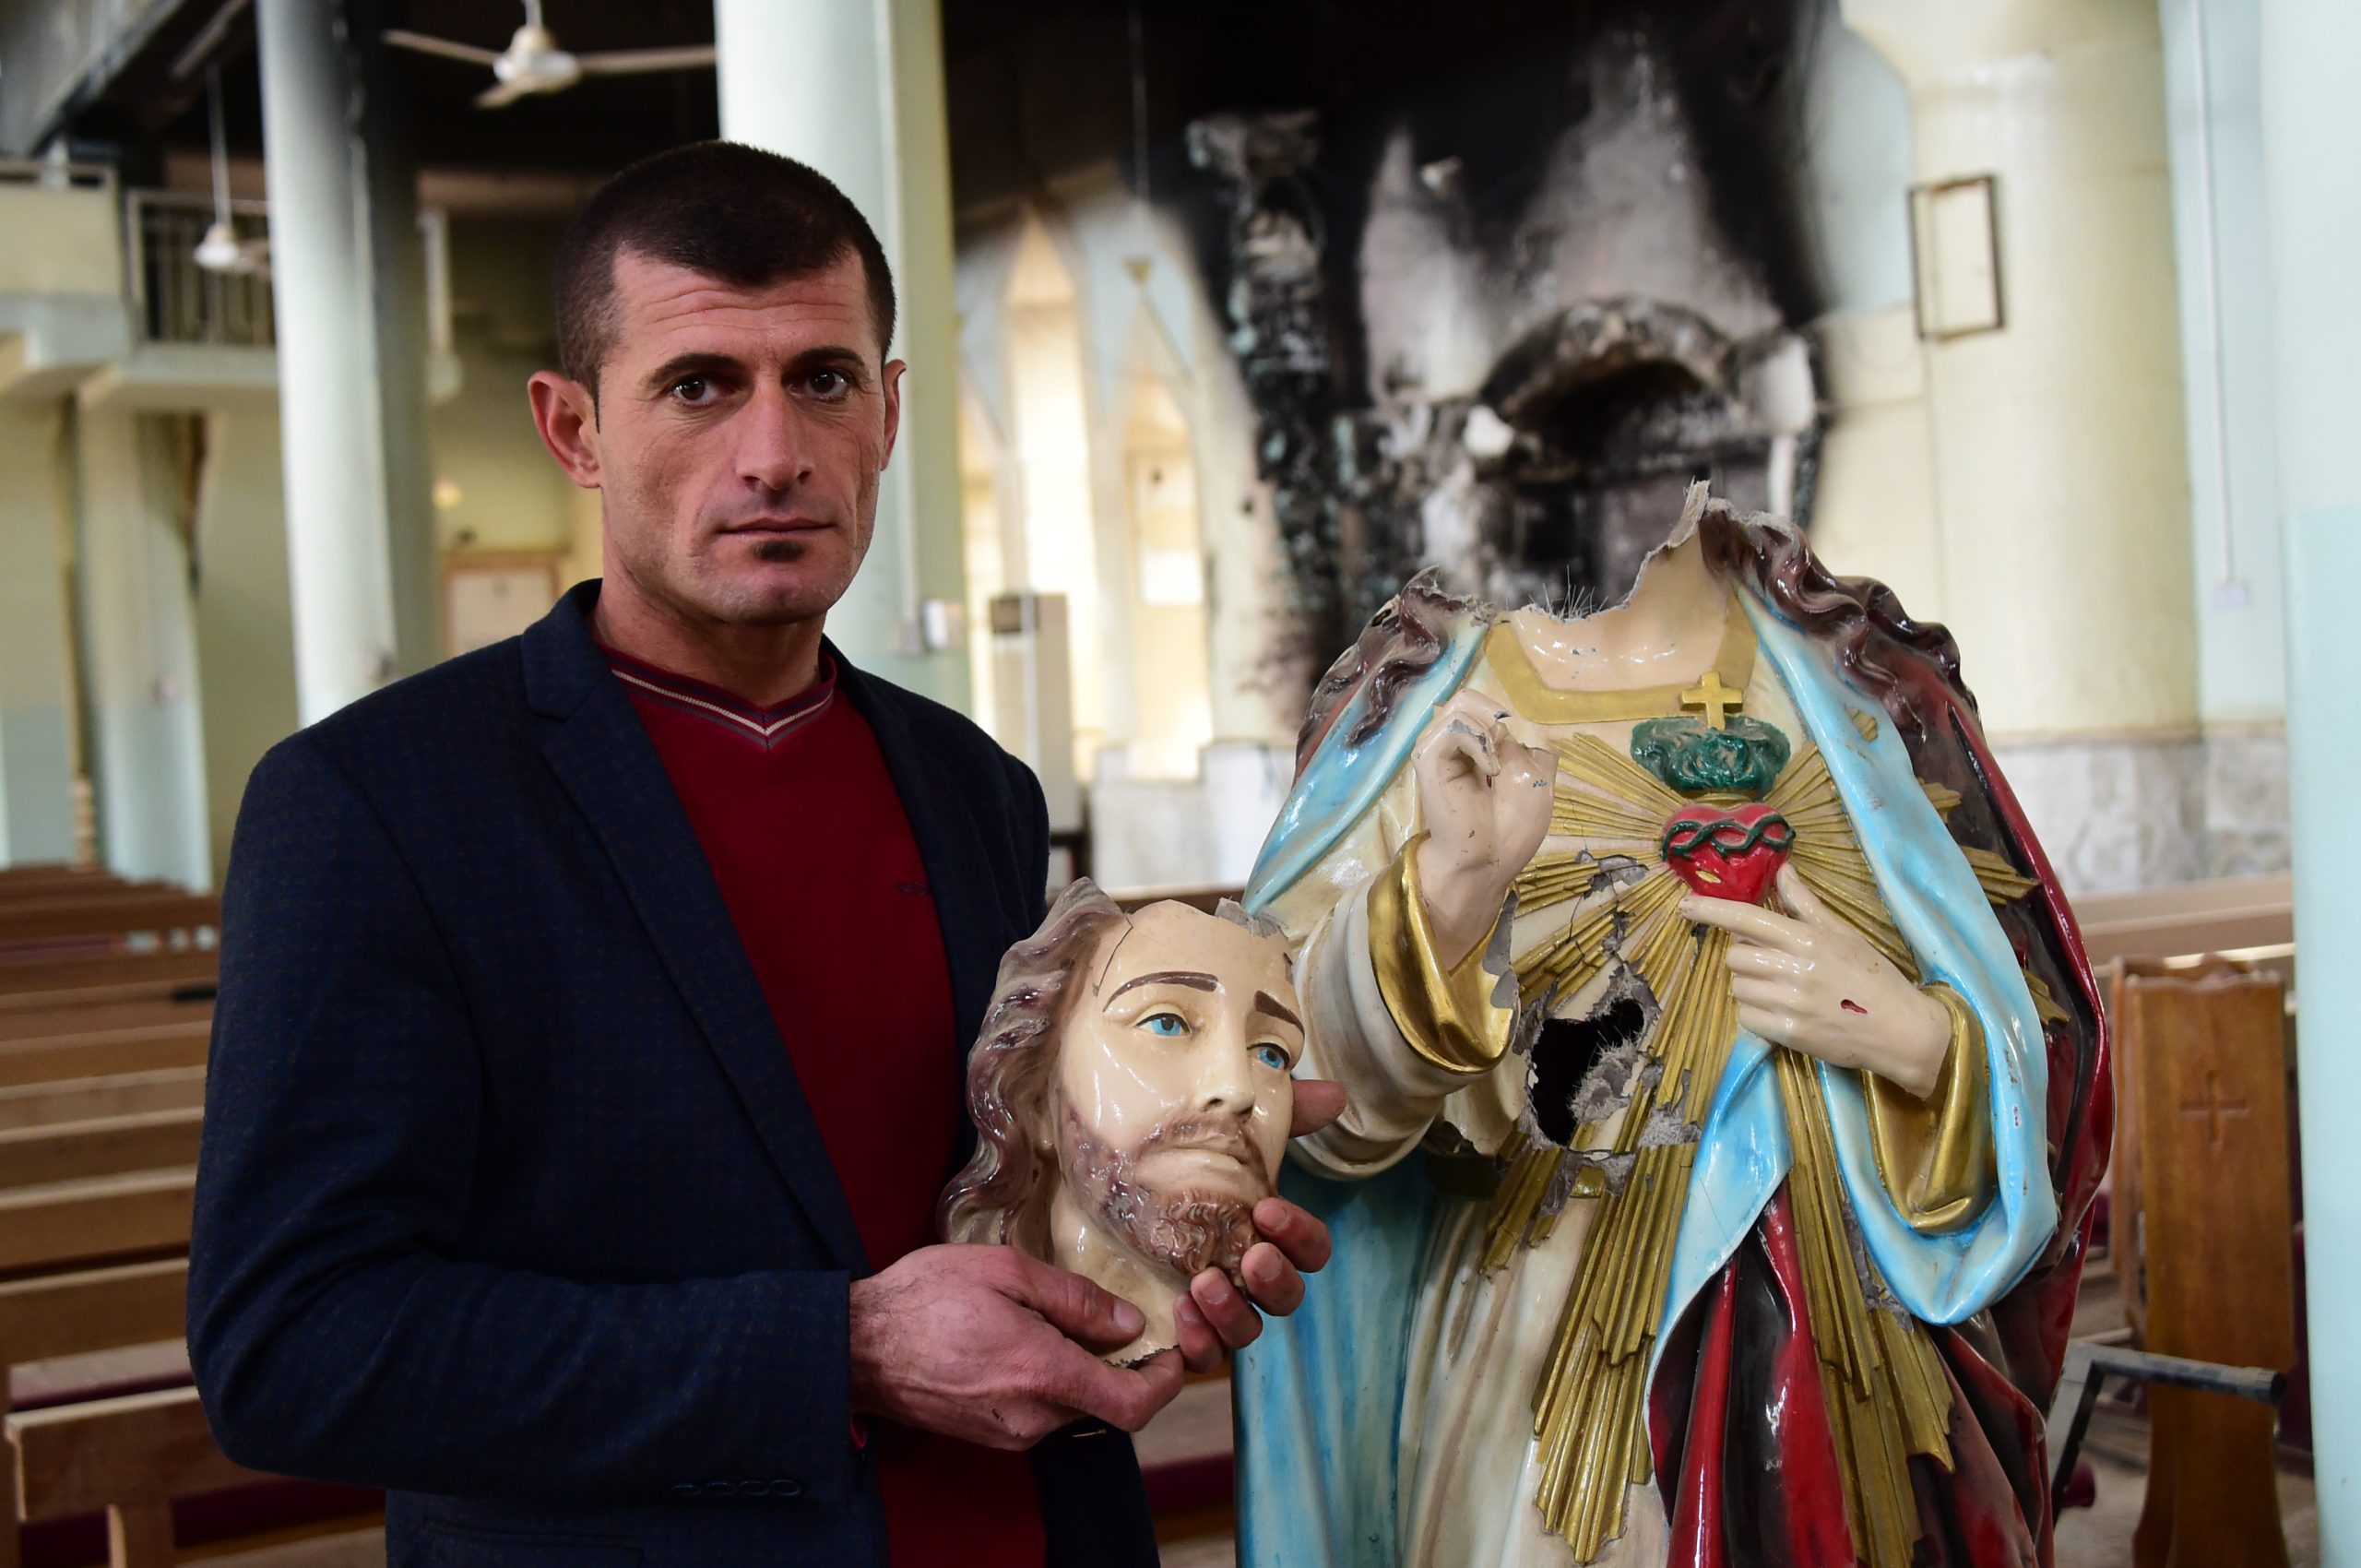 Christian holding the beheaded statue of the Sacred Heart - by Daesh (ISIS) - in St Addai Church, Iraq